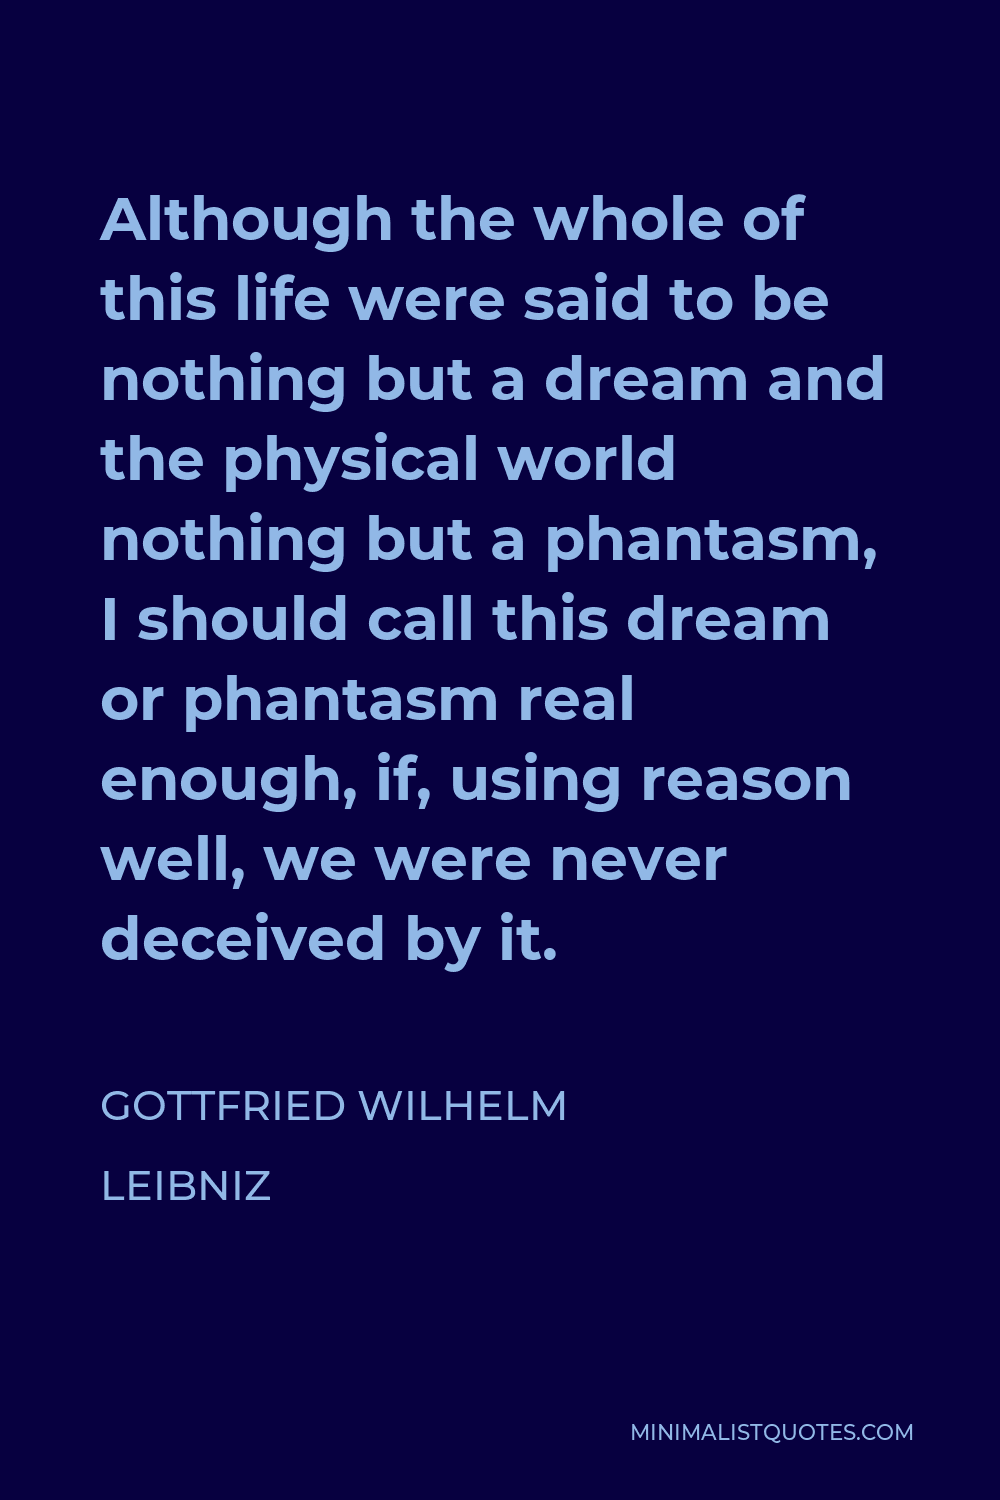 Gottfried Wilhelm Leibniz Quote - Although the whole of this life were said to be nothing but a dream and the physical world nothing but a phantasm, I should call this dream or phantasm real enough, if, using reason well, we were never deceived by it.